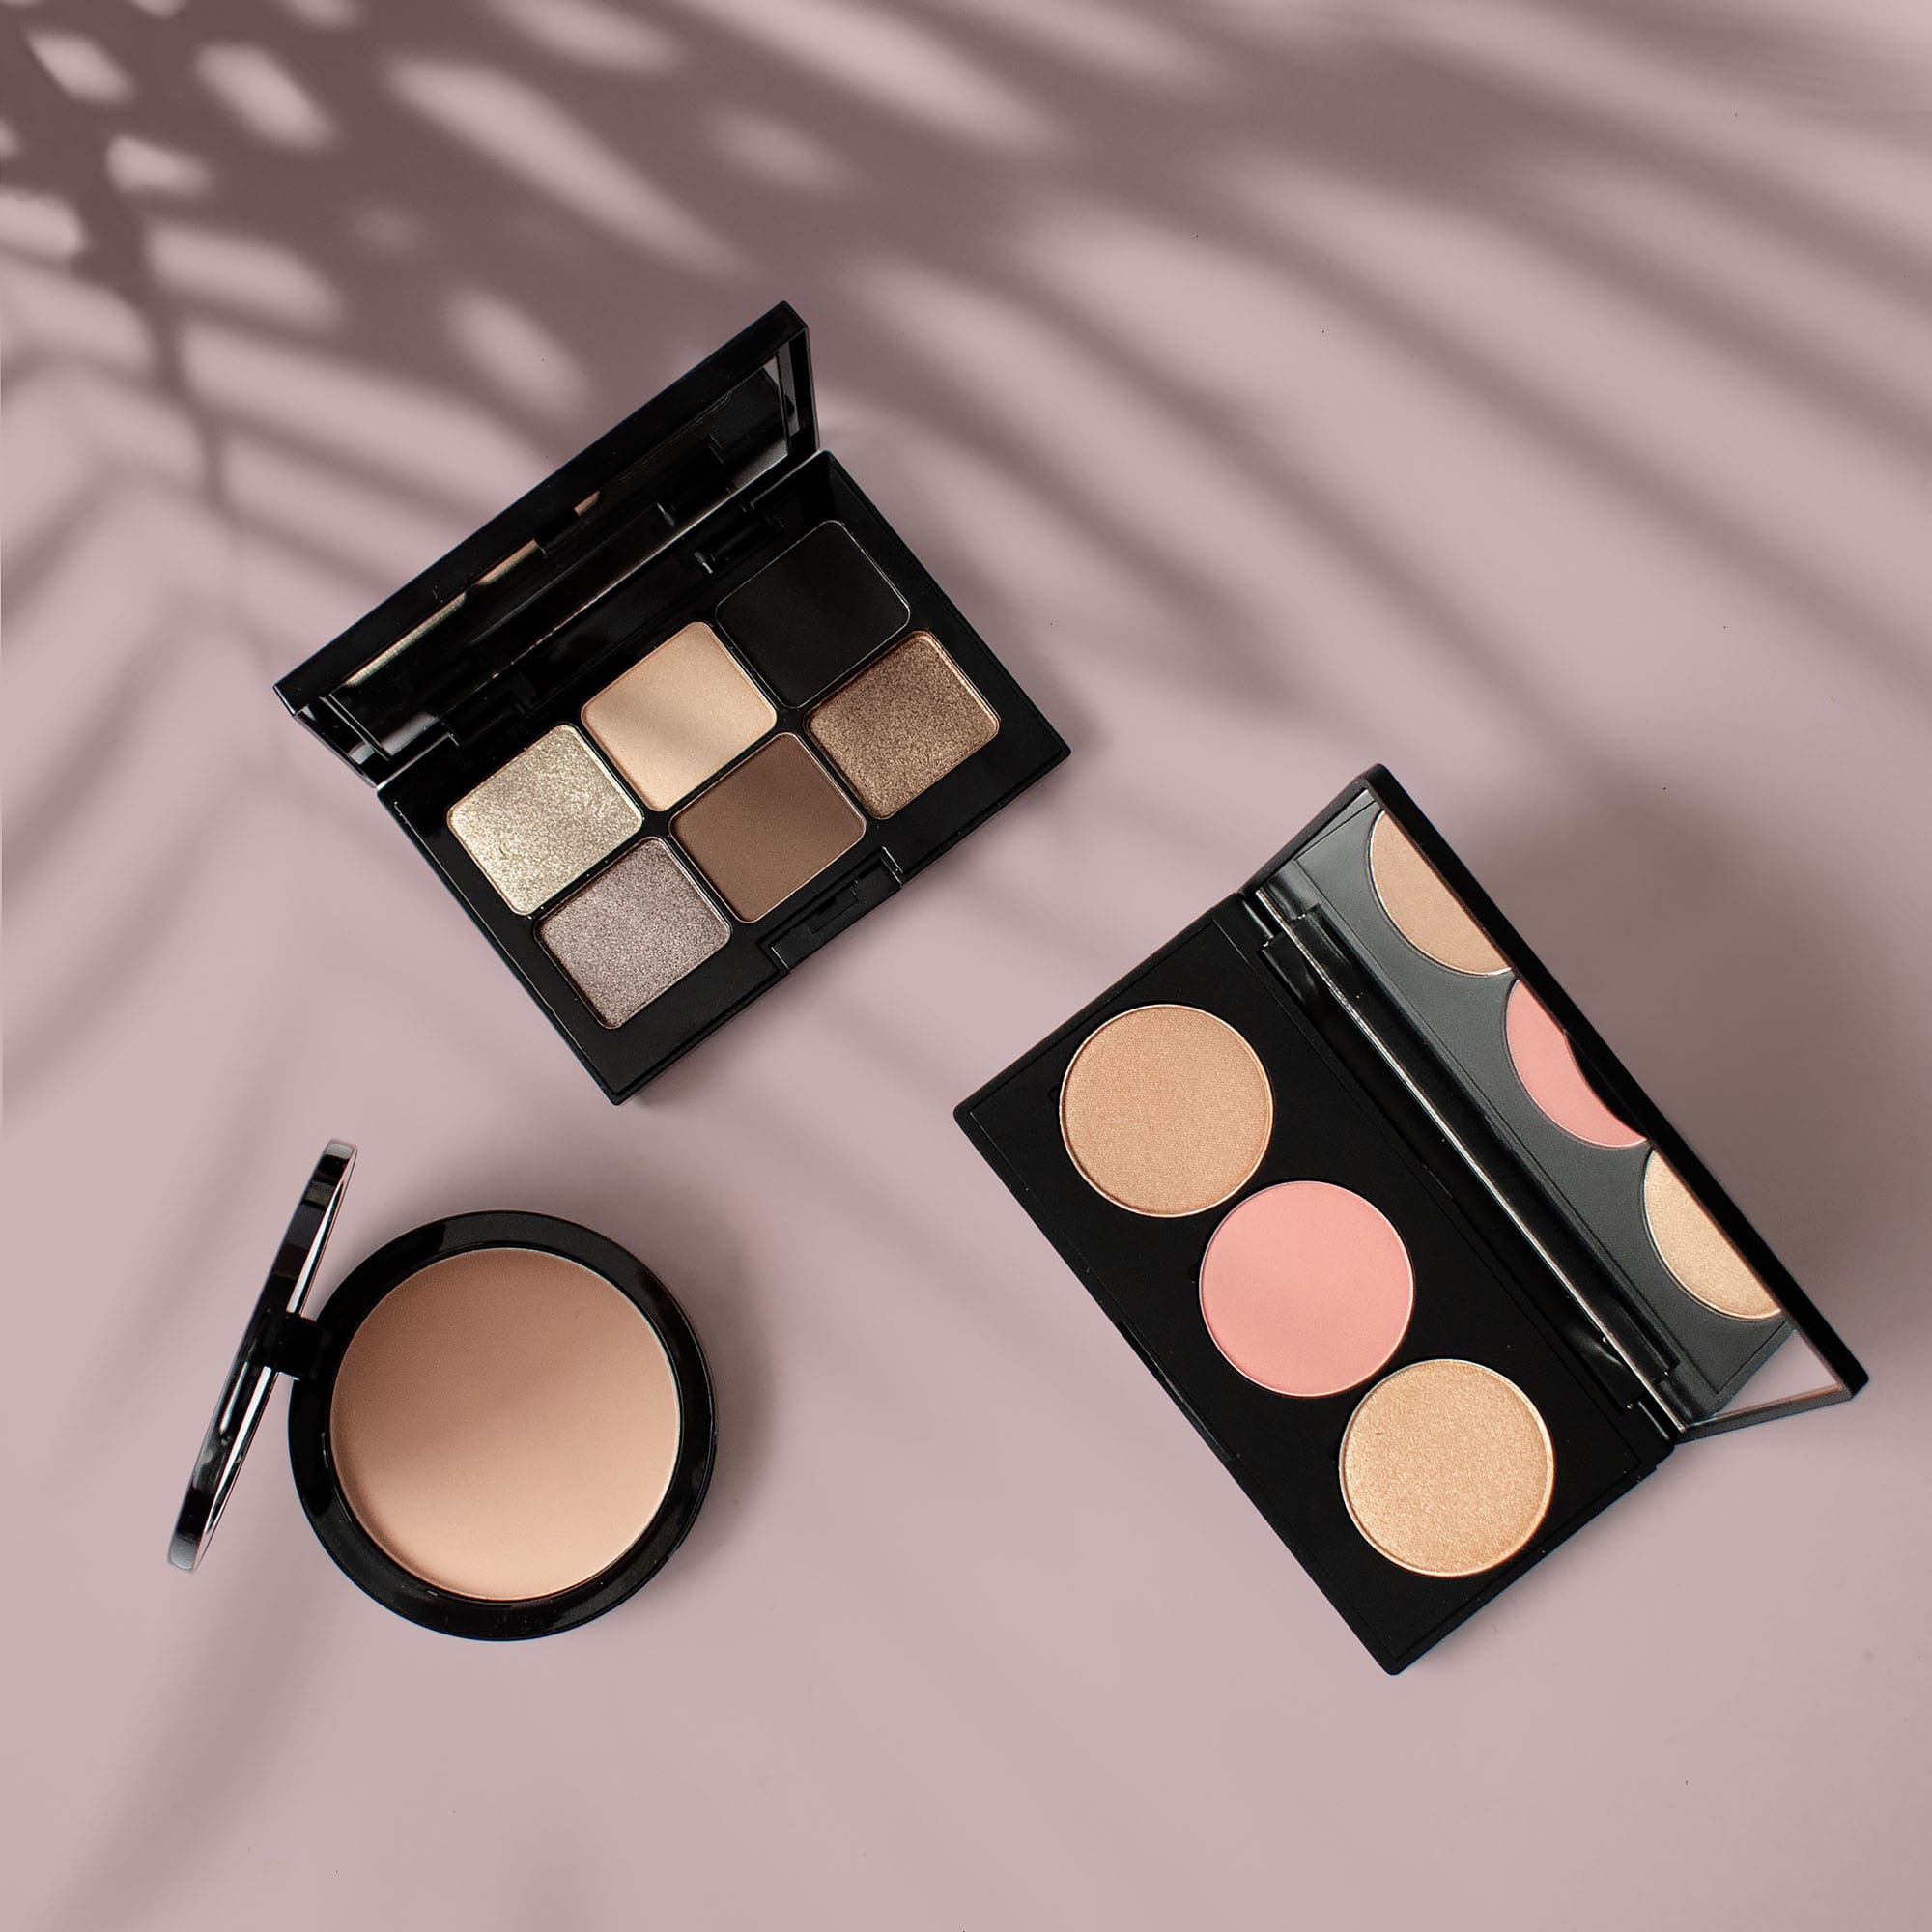 Flat lay of beauty products you brand with your logo. Get started with Blanka today.